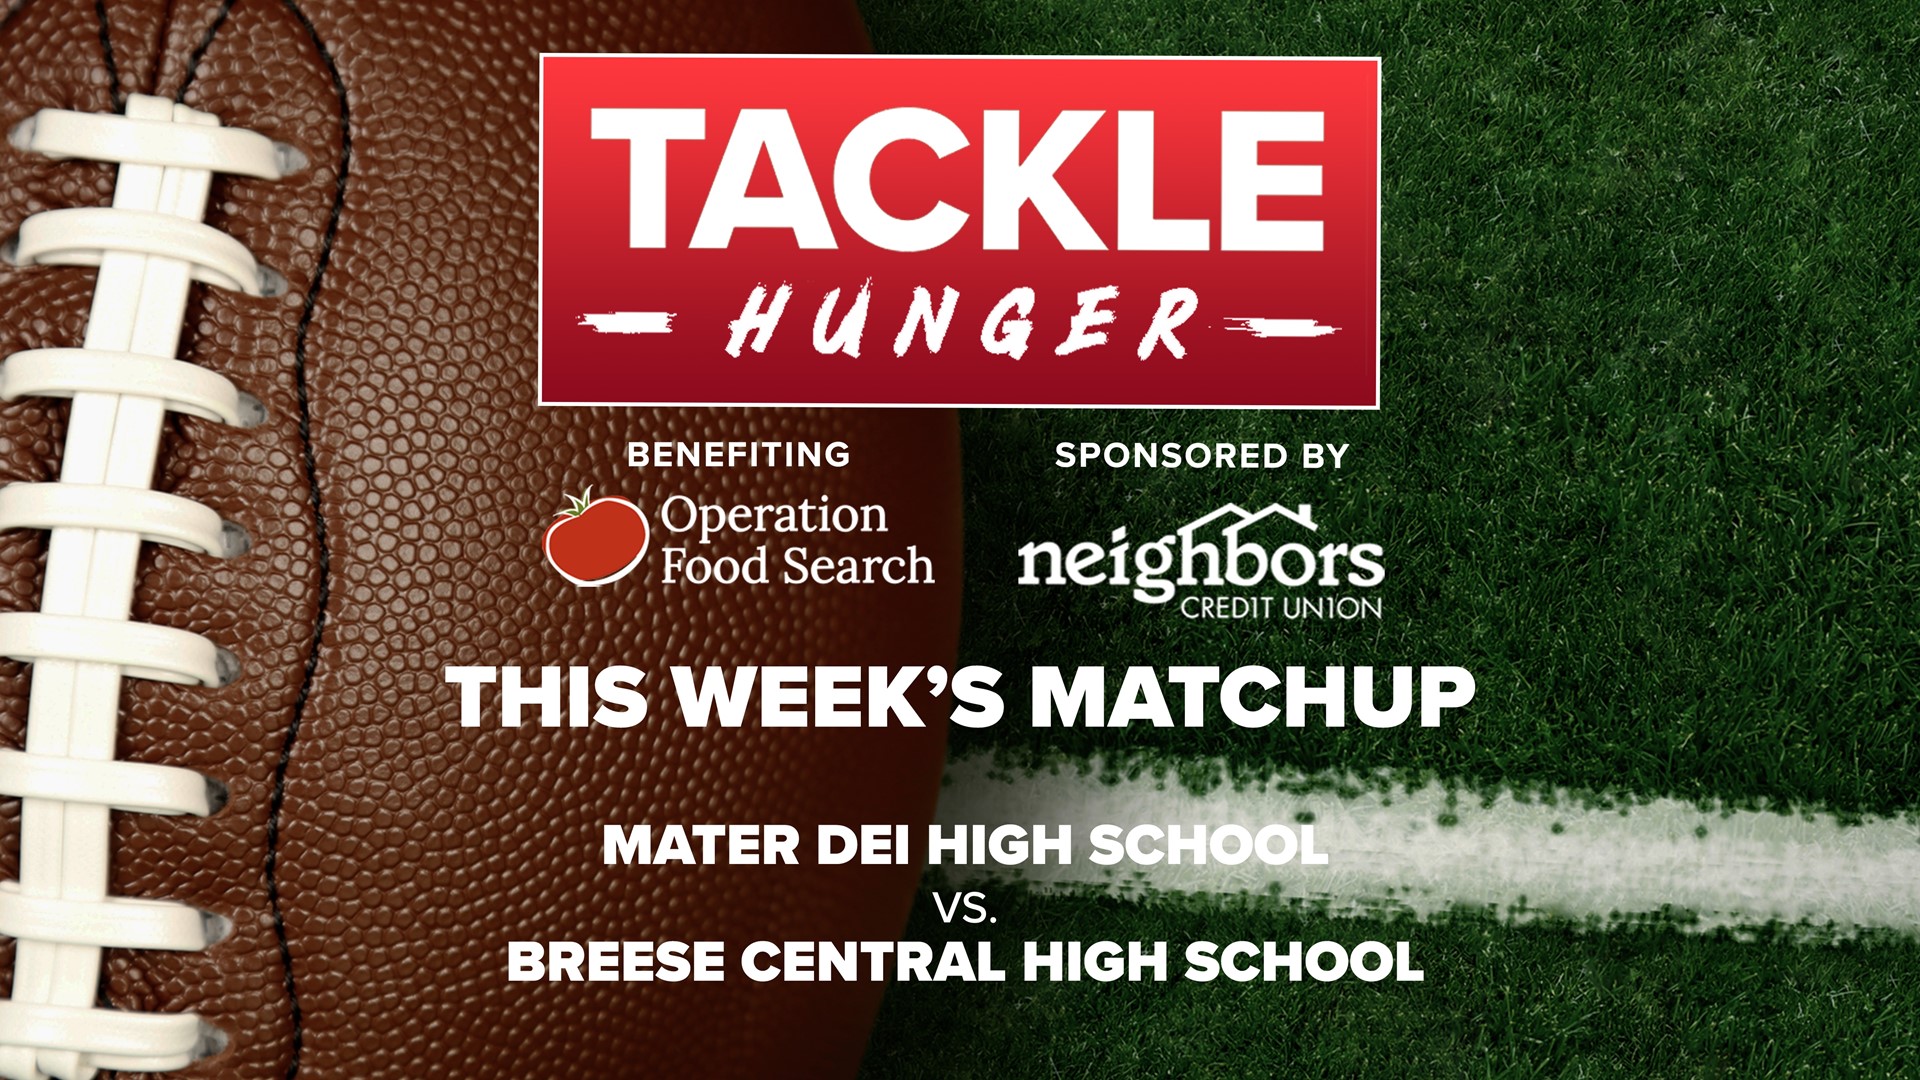 Breese Central High School wins big on two fronts. Central HS won the Milk Bowl, and won the Tackle Hunger competition.